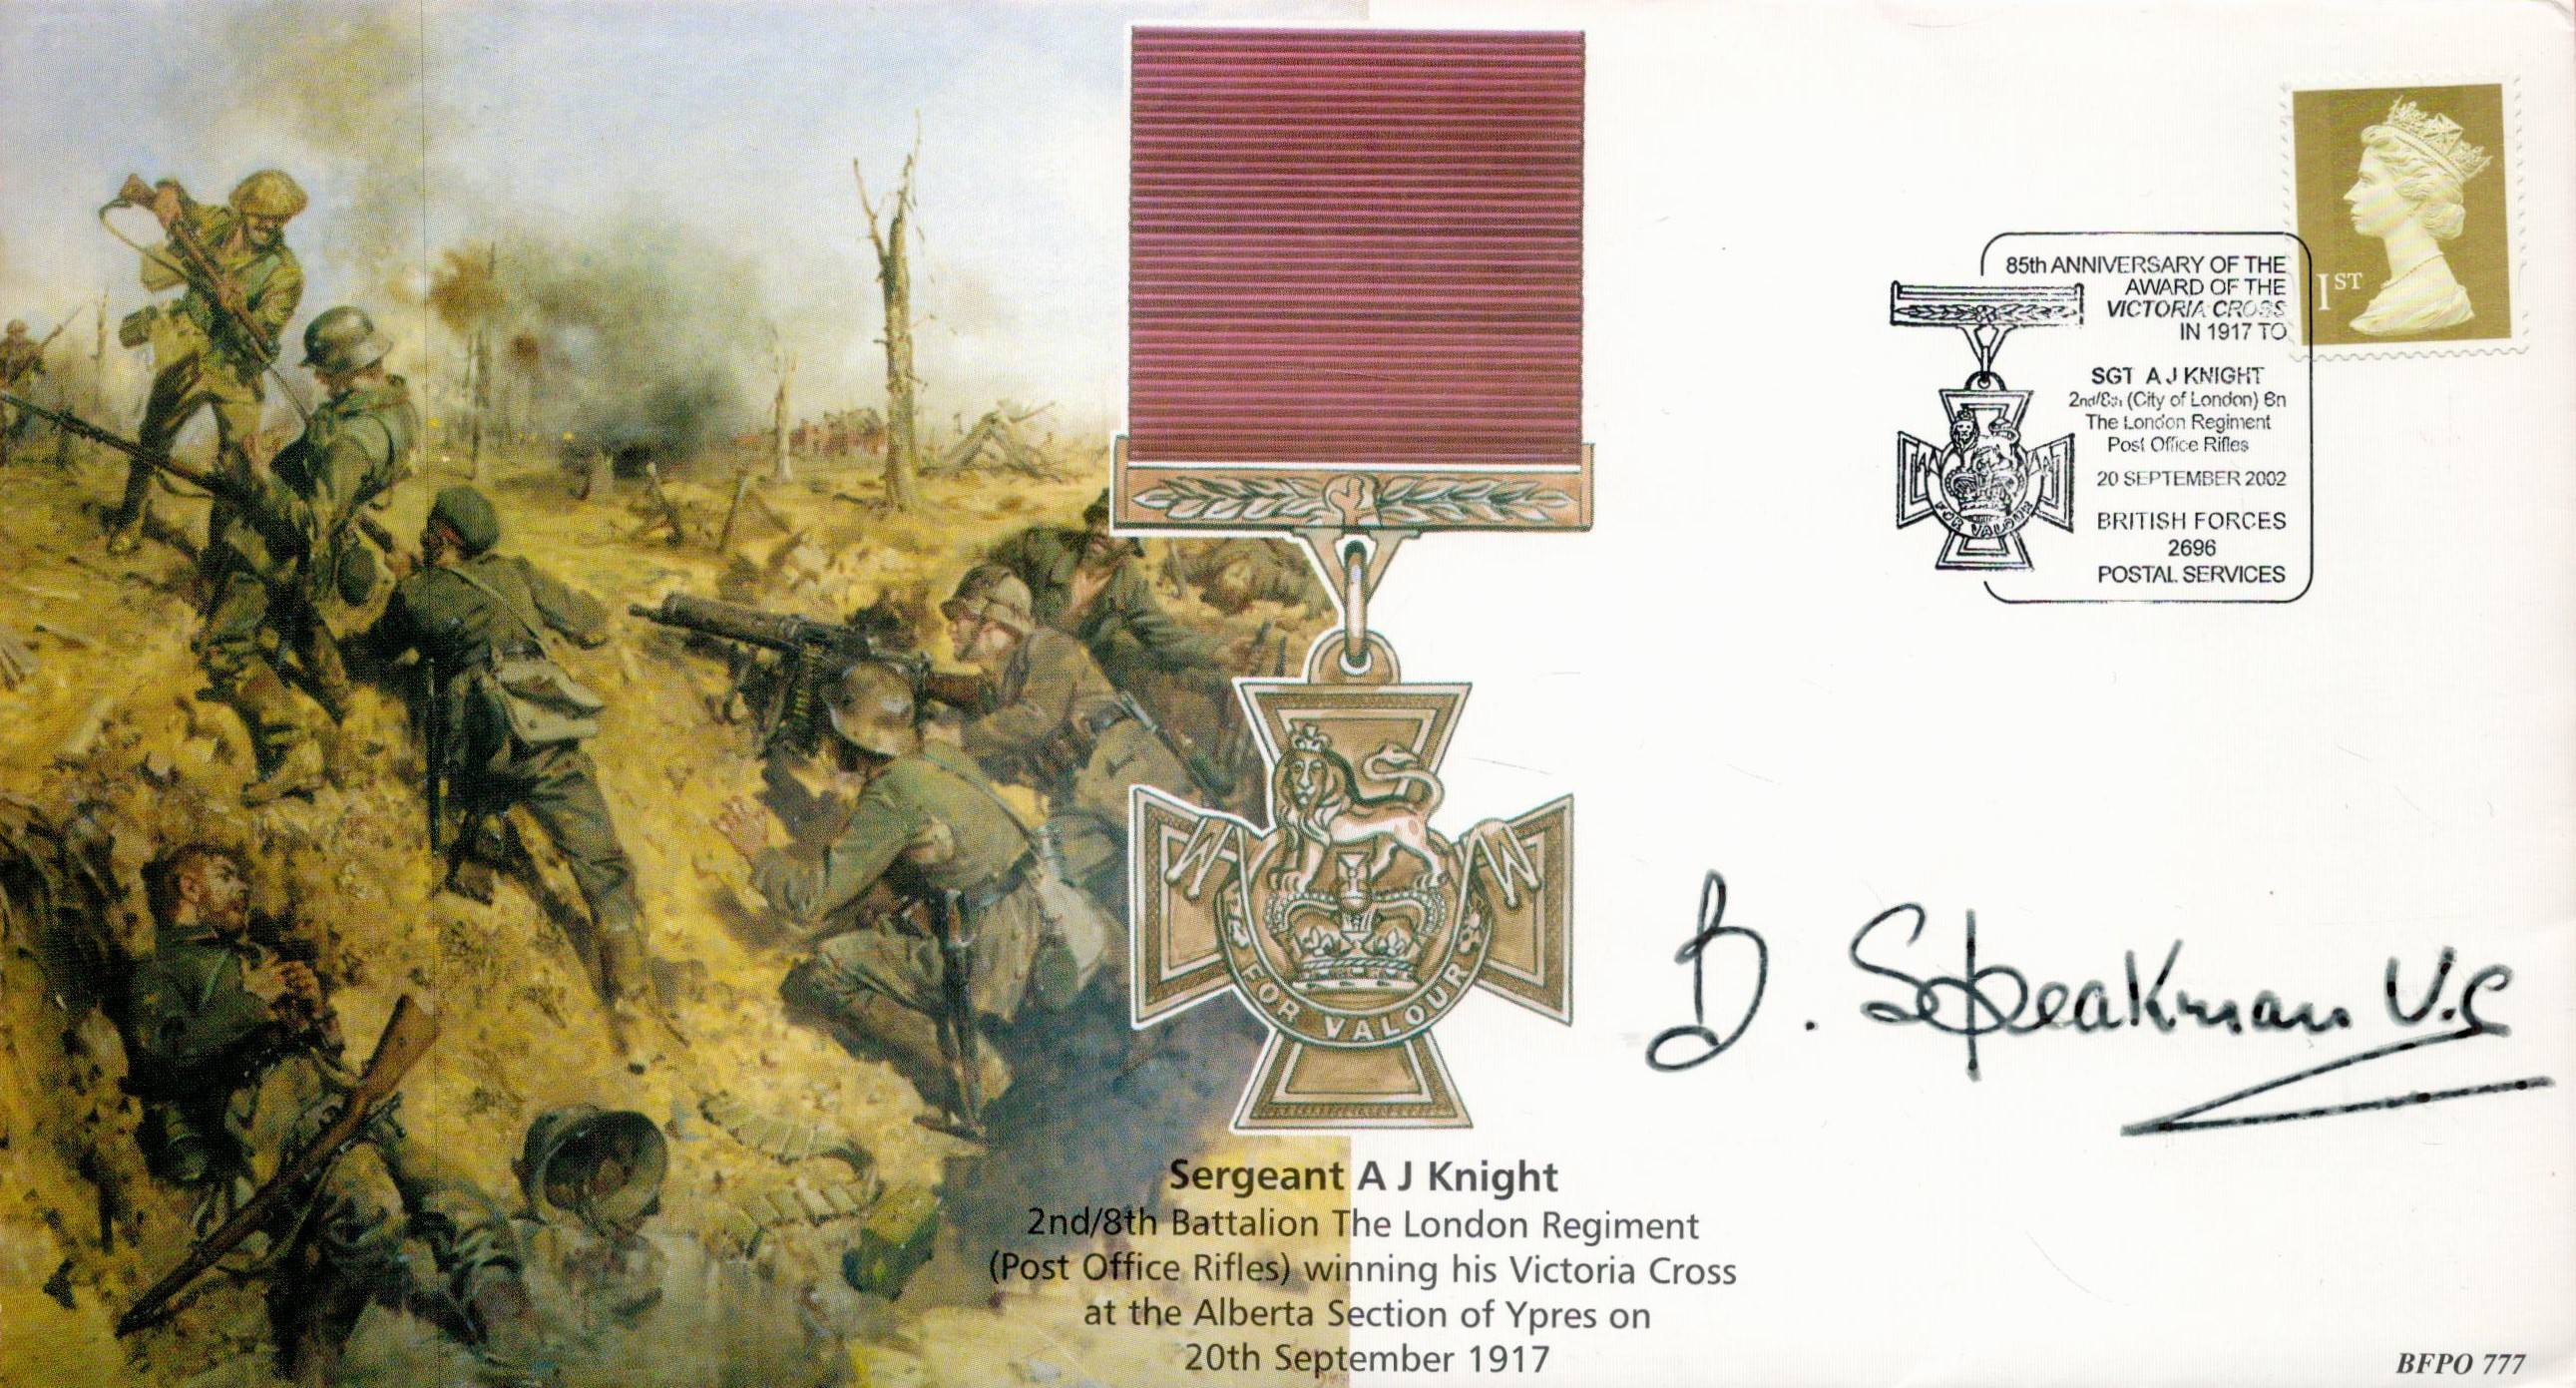 British Soldier Bill Speakman VC Signed Sergeant A J Knight FDC. British Stamp with 20 Sept 2002